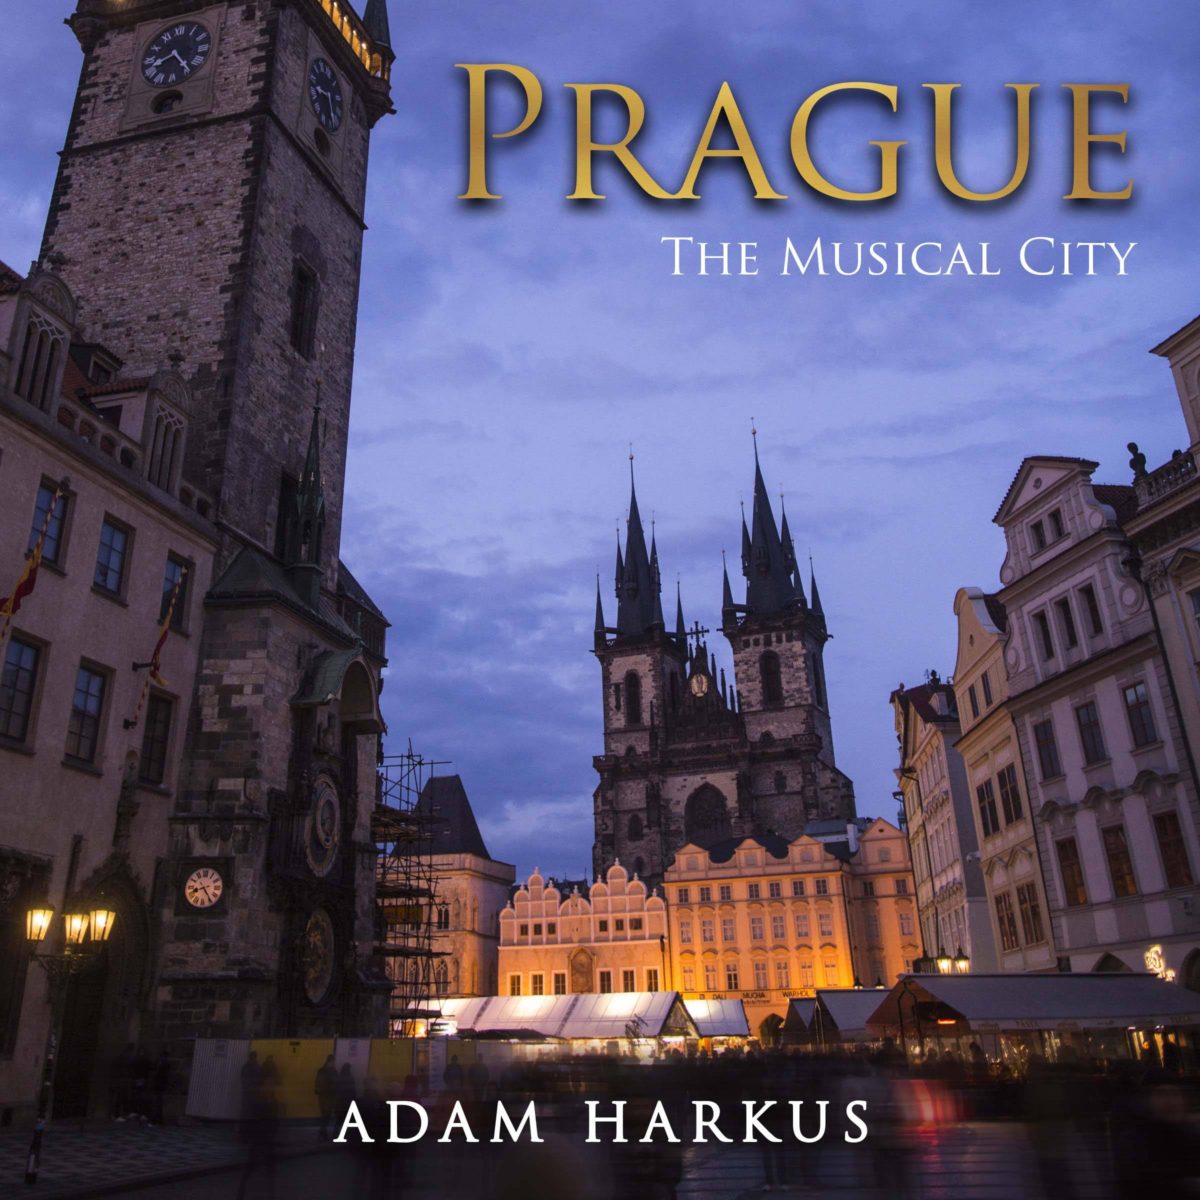 Prague: The Musical City. Audiobook available for FREE on Audible now! The Blogging Musician @ adamharkus.com